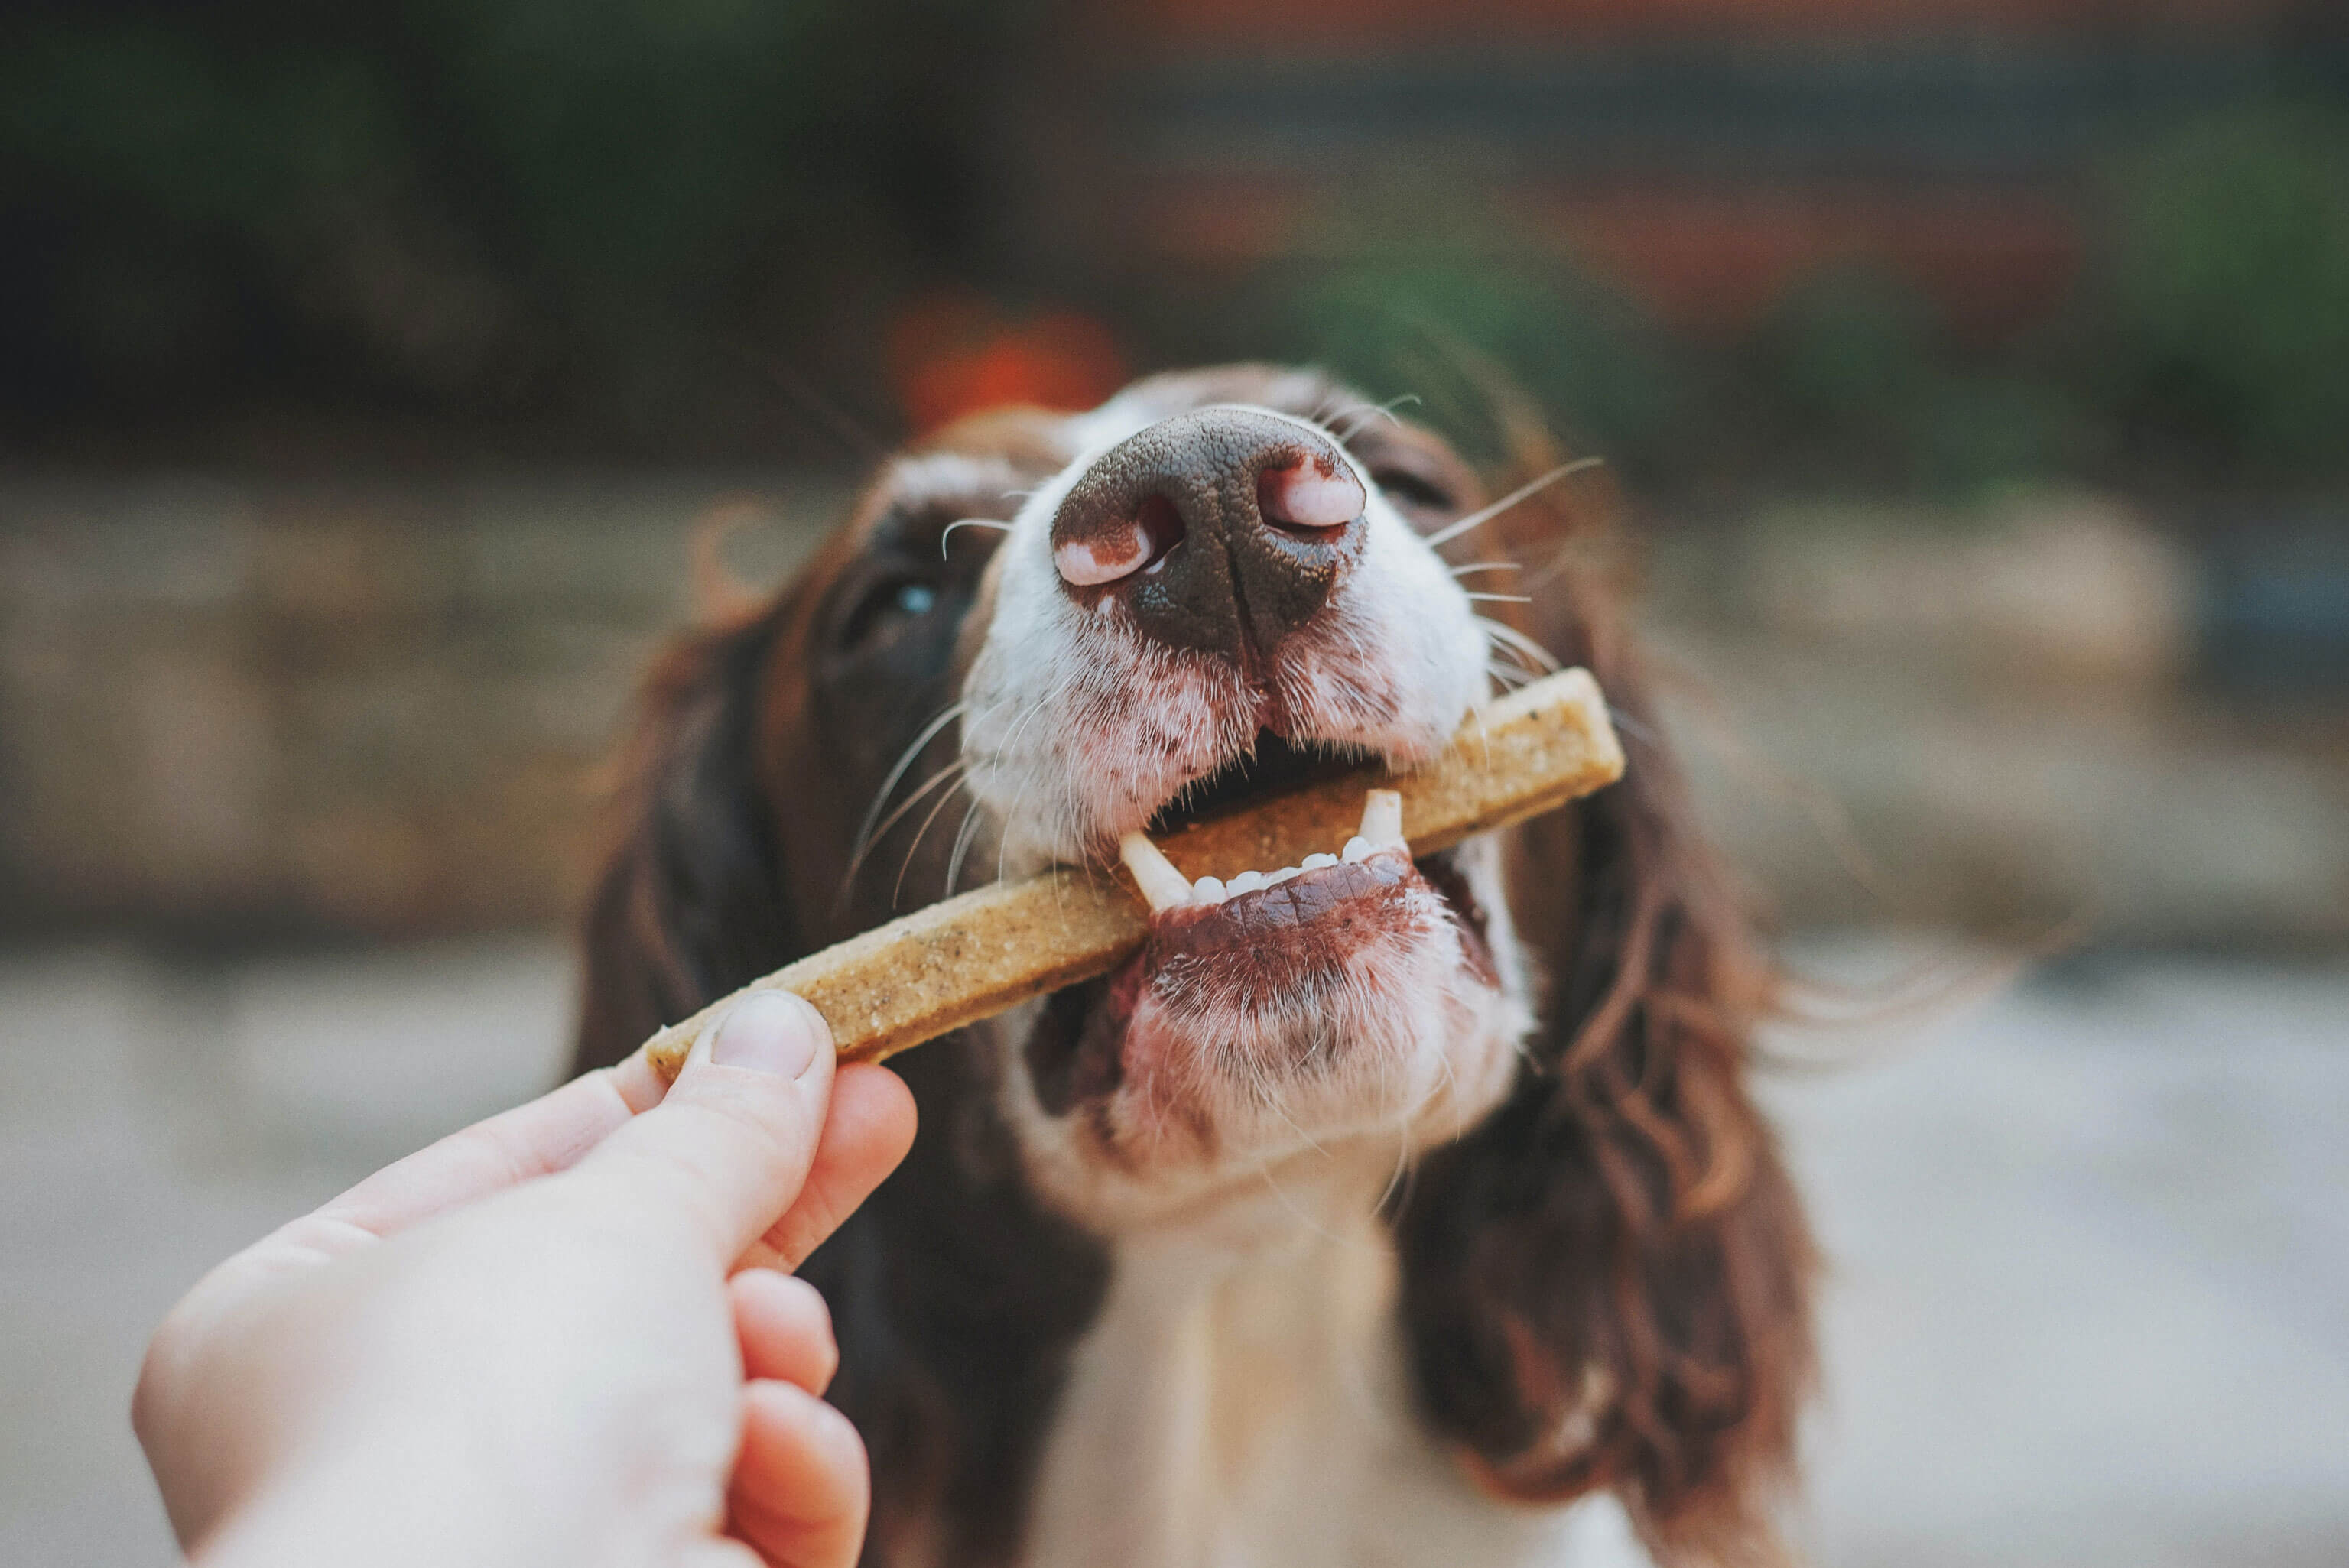 A spaniel eating a treat from someone's hand.